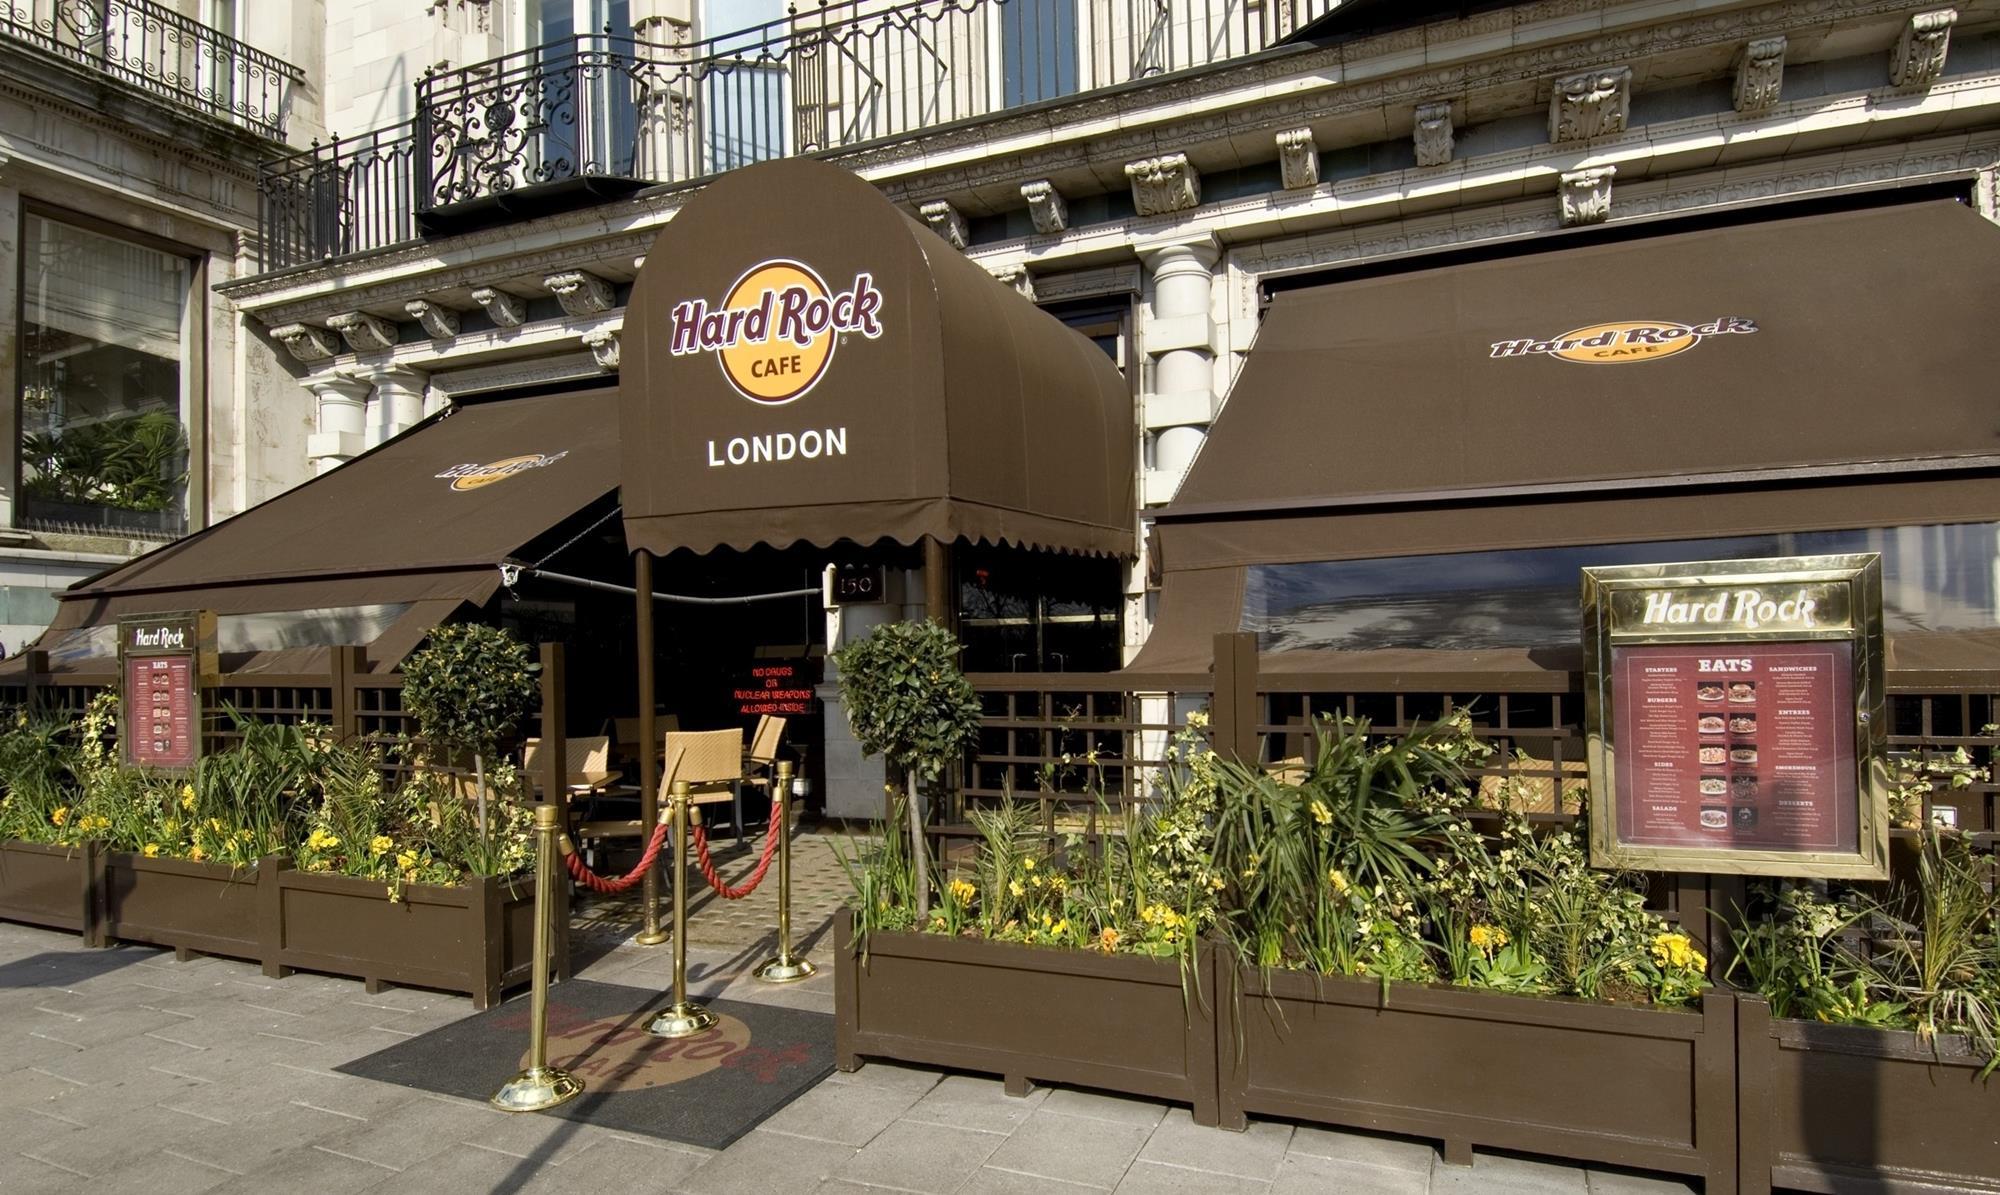 Hard Rock Cafe London is first in the world to offer new menu | News